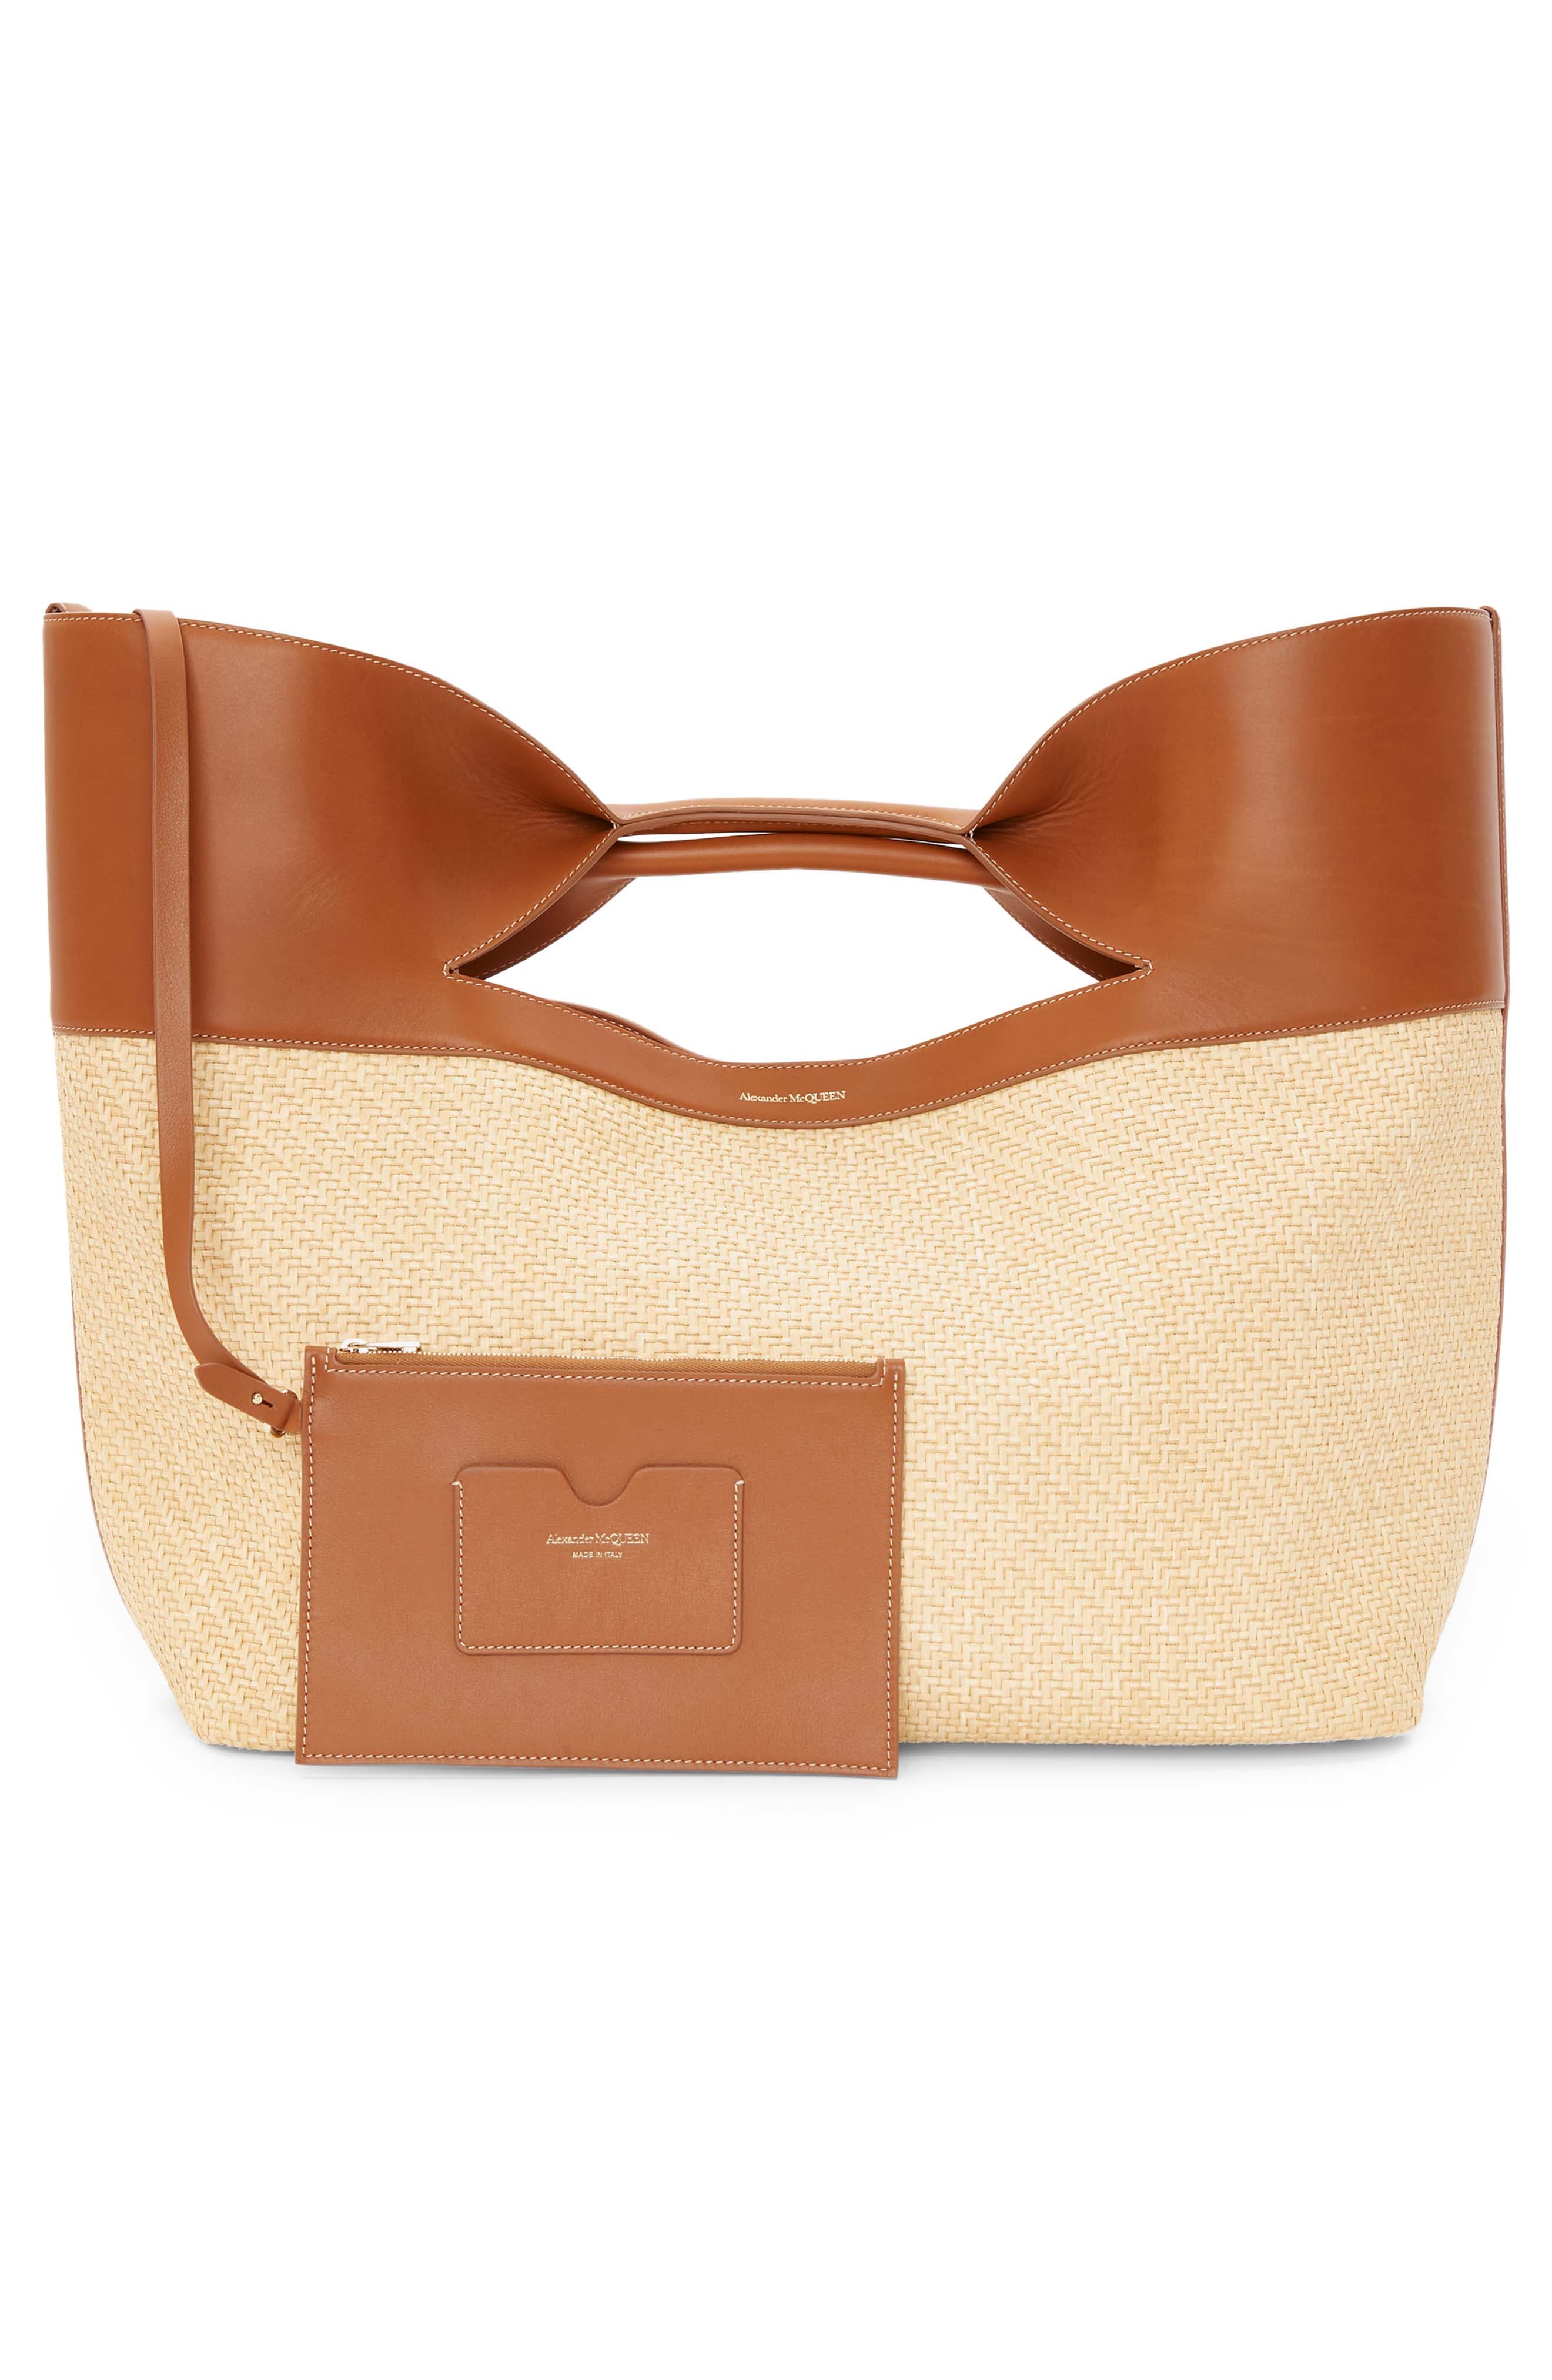 Alexander McQueen The Bow leather tote bag - Brown